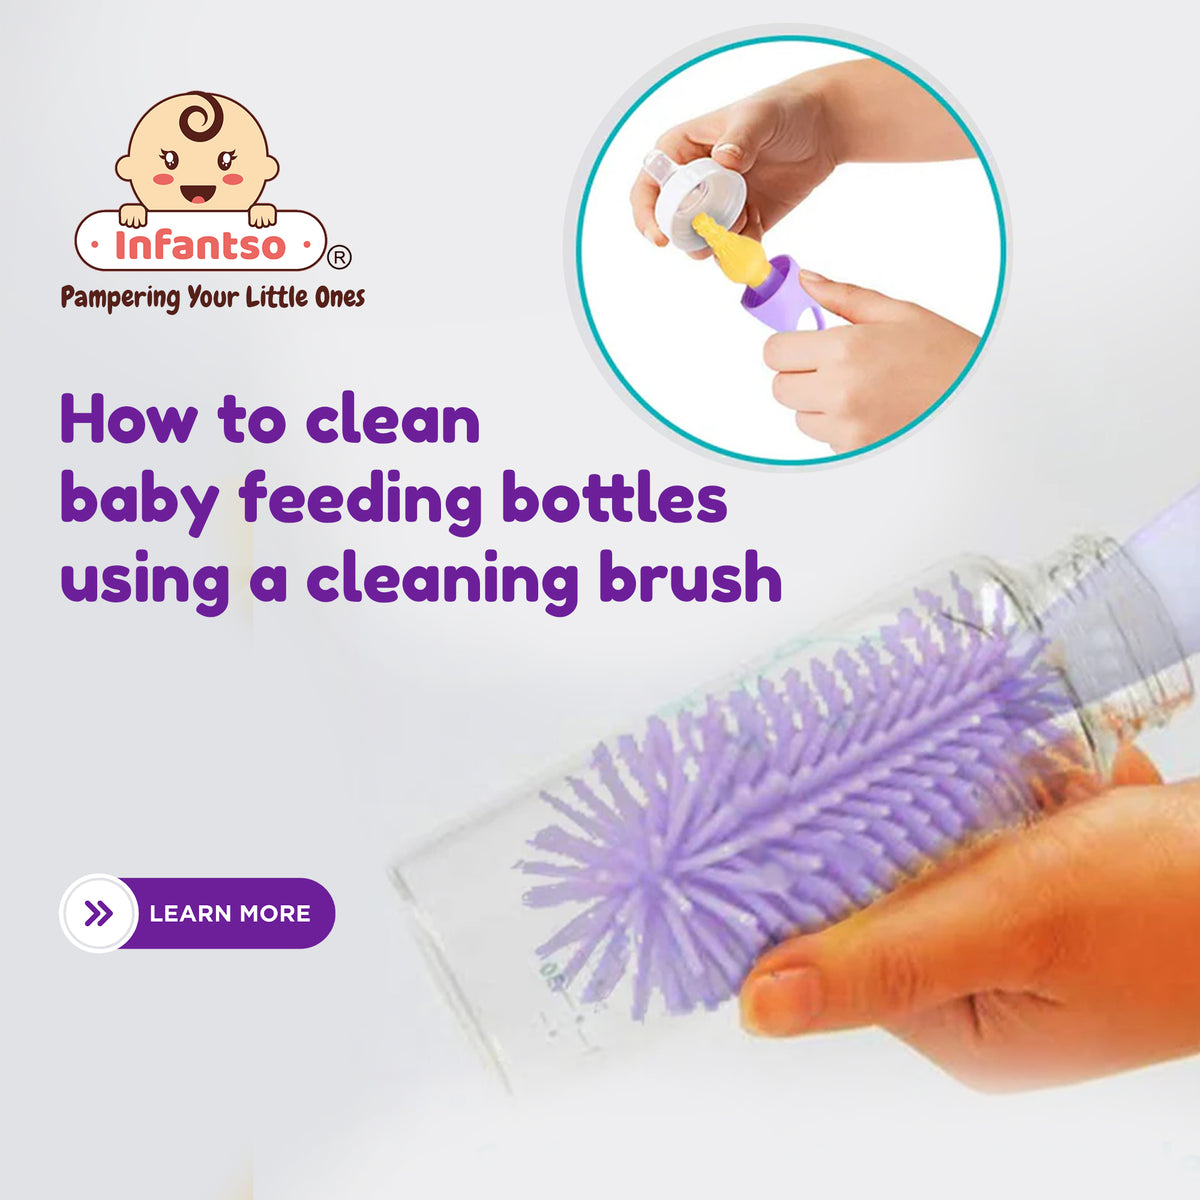 How to clean baby feeding bottles using a cleaning brush